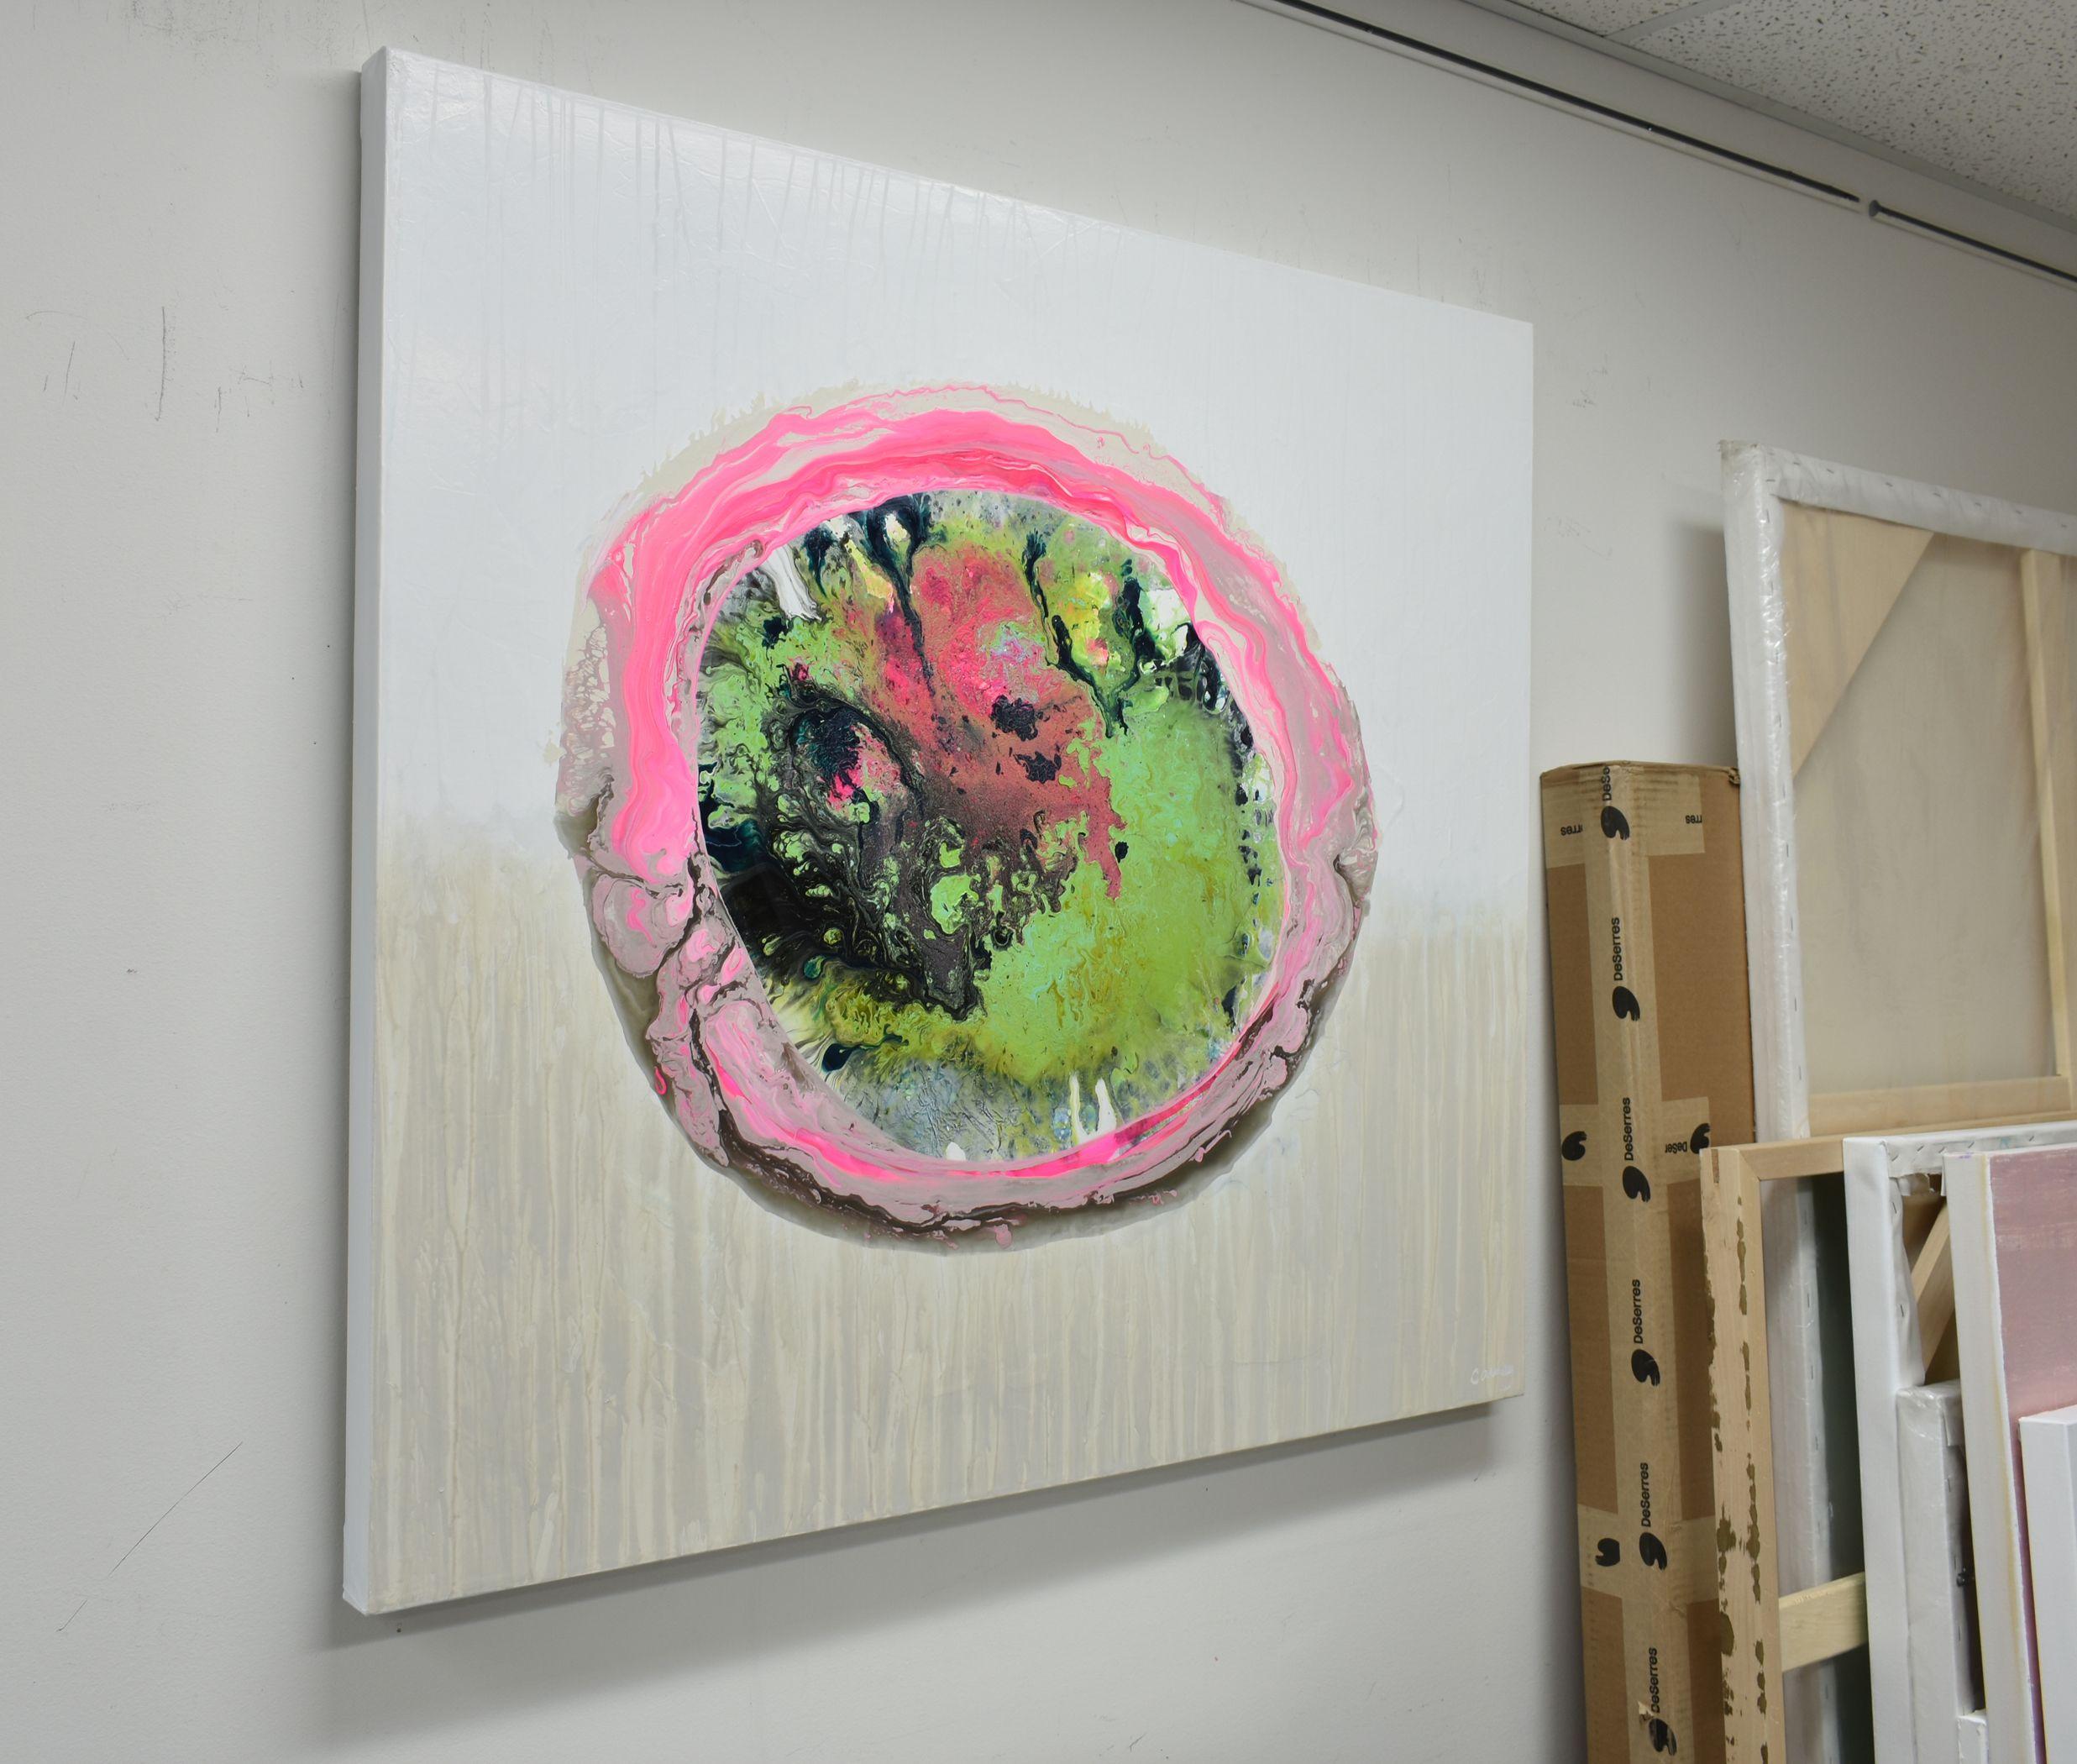 Large acrylic painting on canvas. The fluorescent pink and lime green colors are contrasted on a white and gray background. A painting full of energy to decorate your home.    The work is signed on the front and signed, titled and dated on the back.